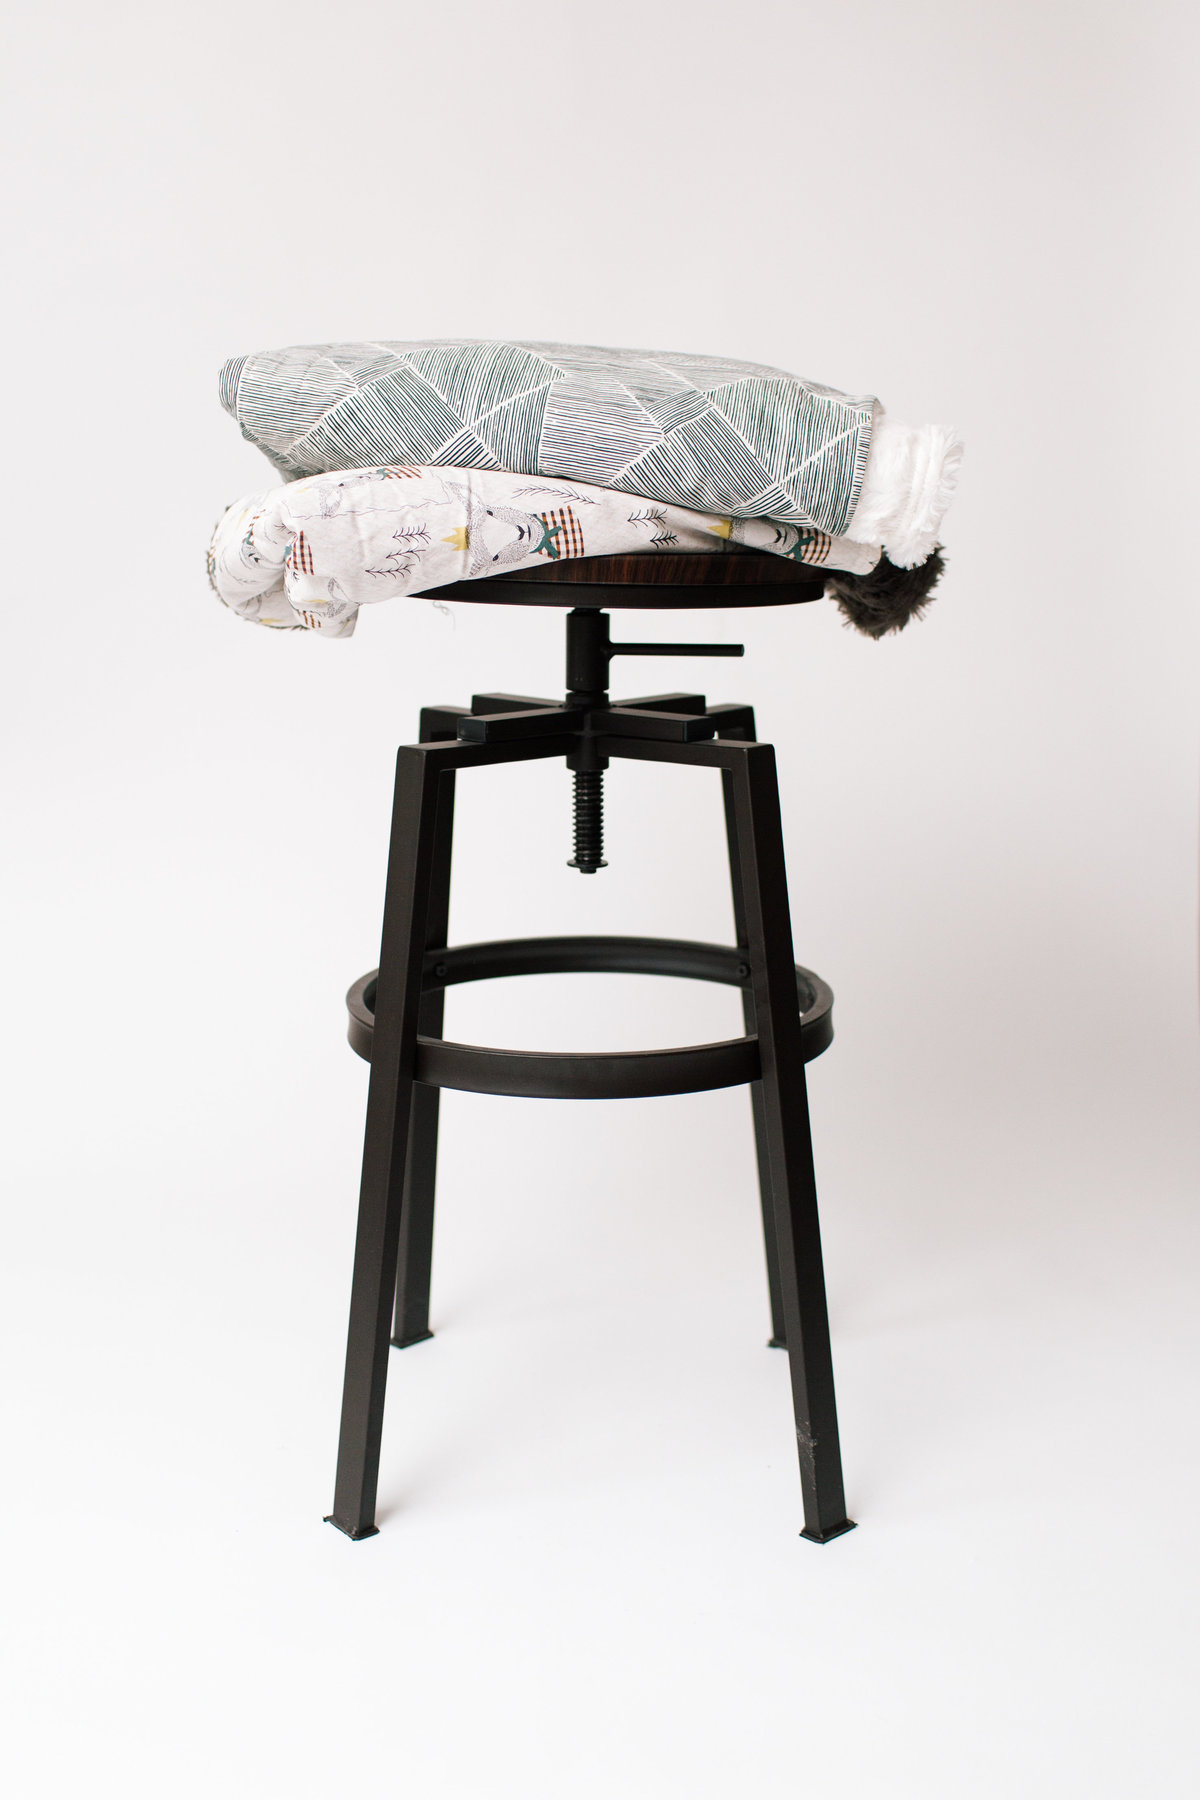 blankets stacked on black stool on white background